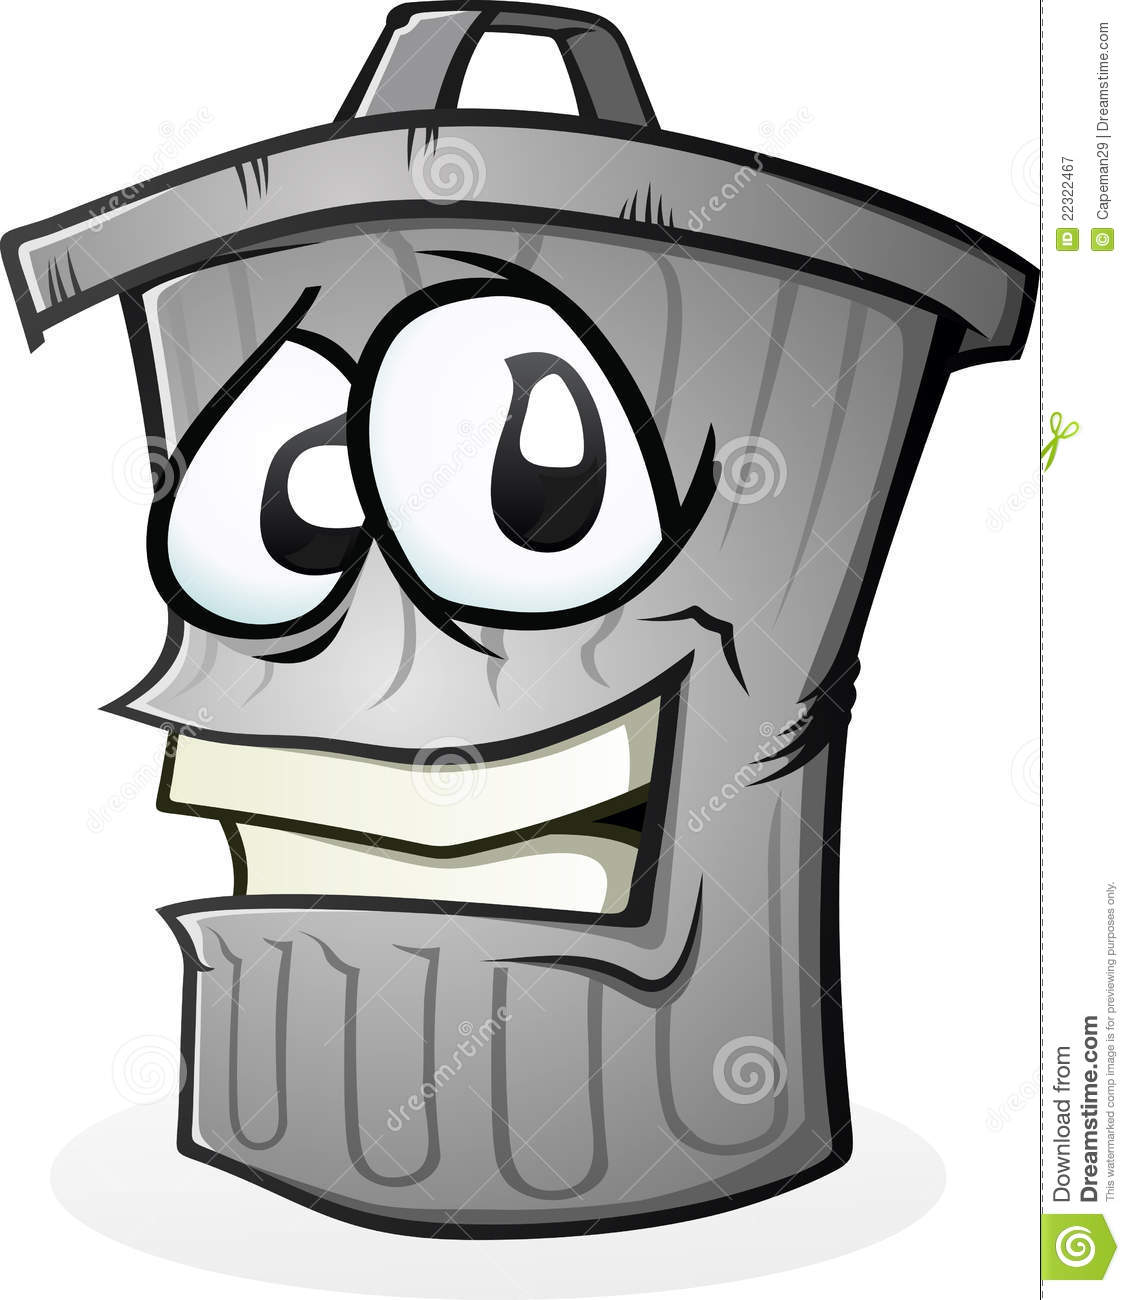 Trash Can Full Of Smelly Garbage  Not Really Sure Why He Is Smiling